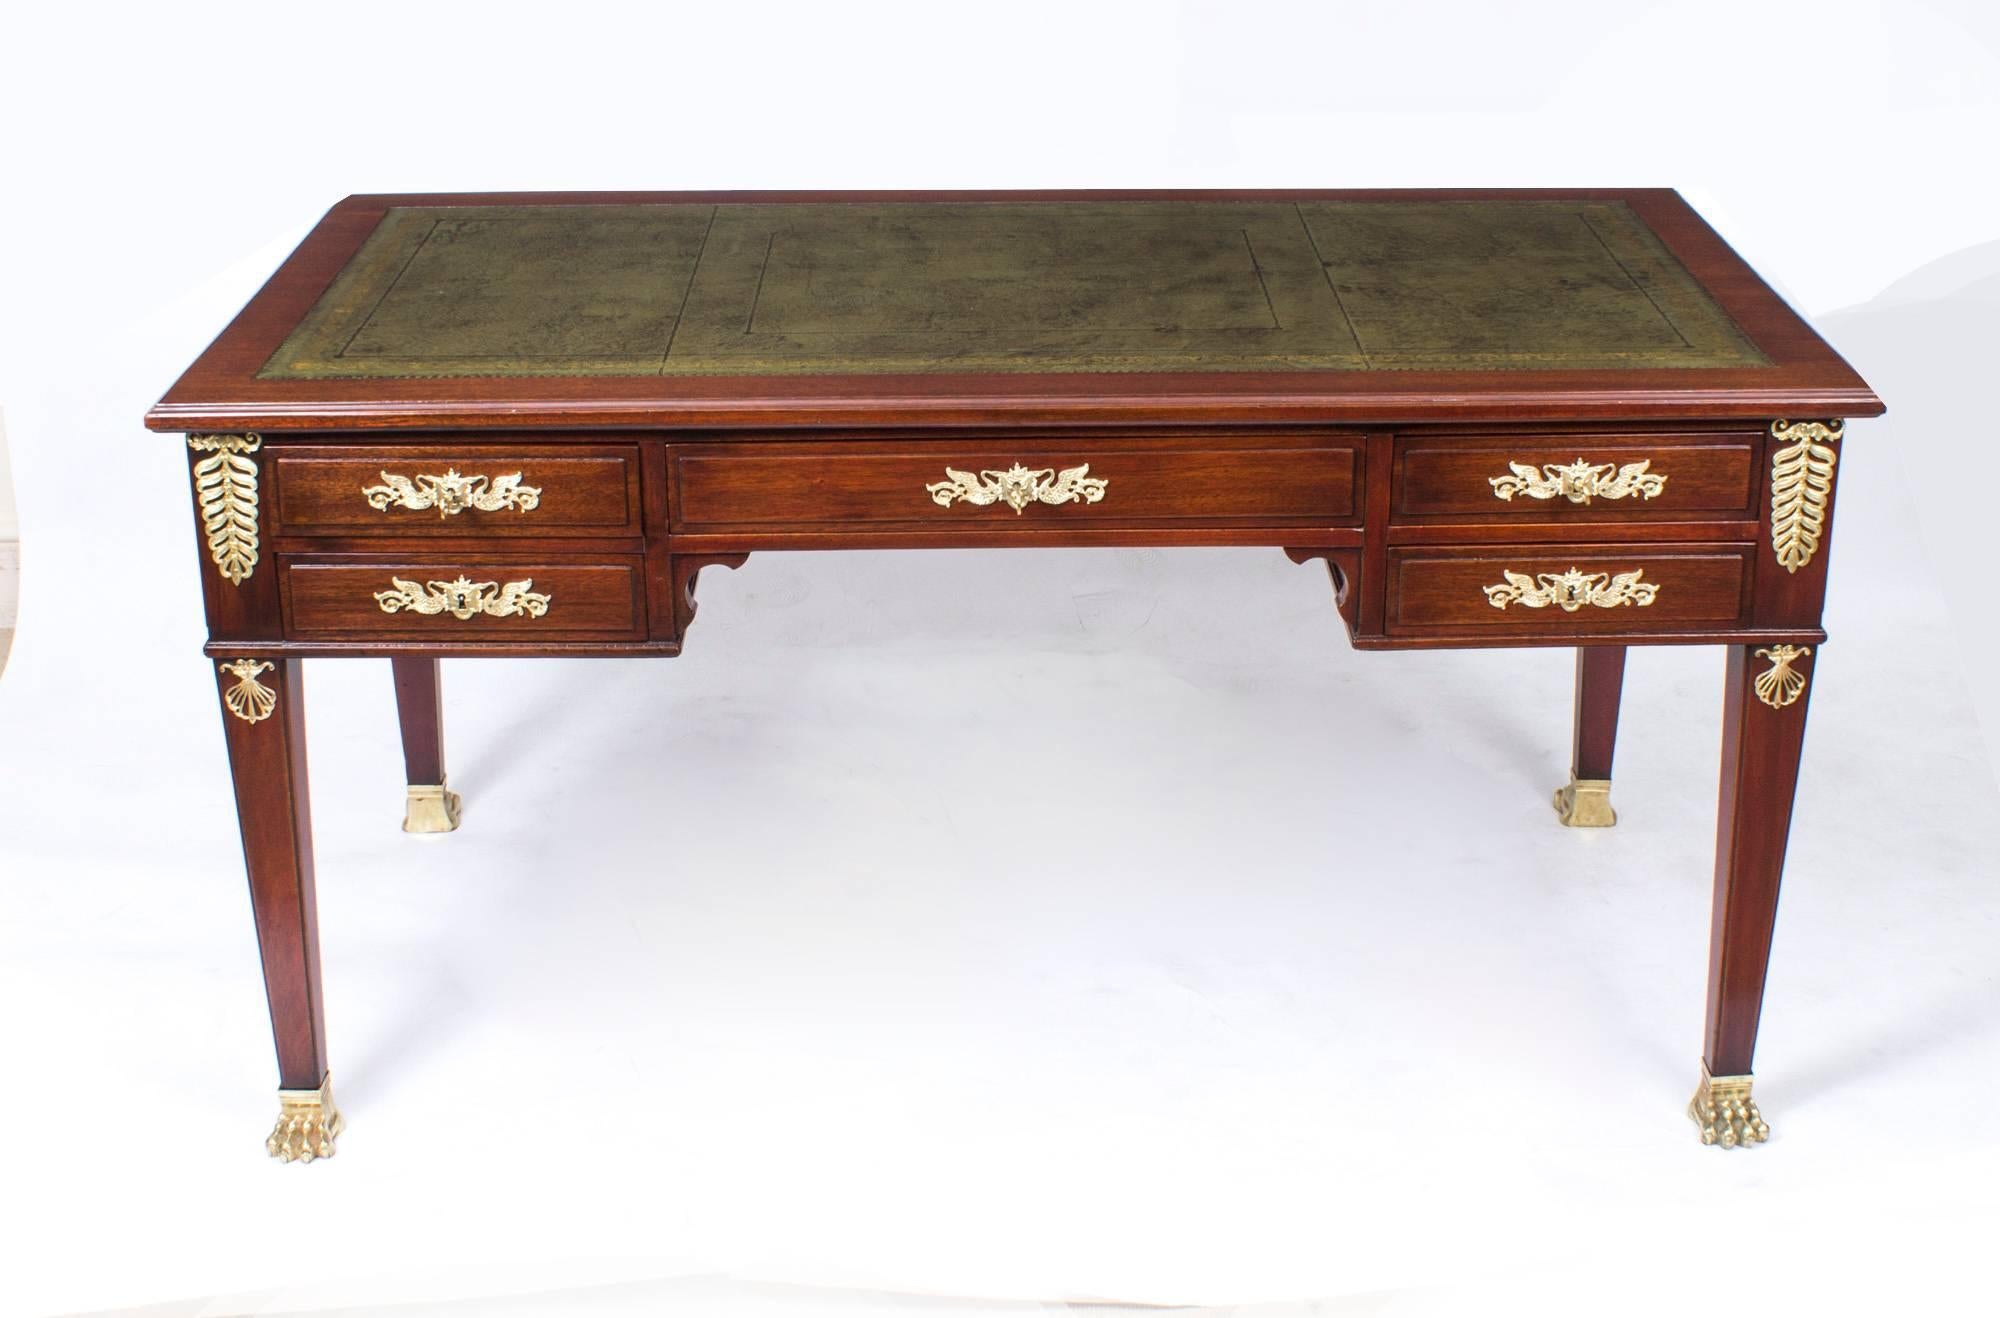 We are very pleased to be able to offer this Antique French Empire Ormolu Mounted Desk and Chair for sale. 
Dating from around 1880, this French Empire Desk and Chair is fashioned in flame mahogany with ormolu mounts.
With elegant proportions the